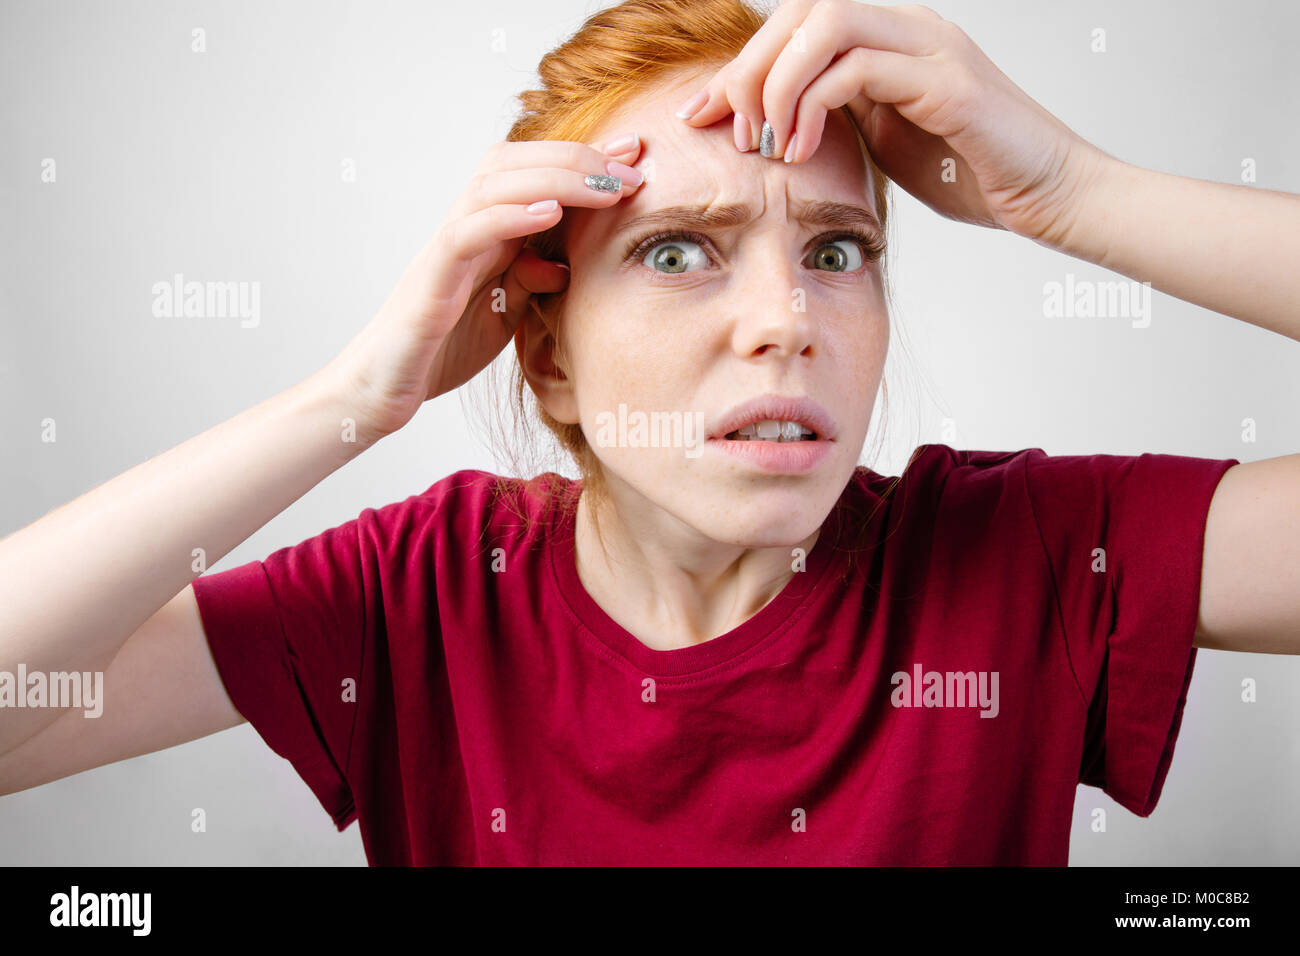 redhead woman squeezing her pimples, removing pimple from her face Stock Photo